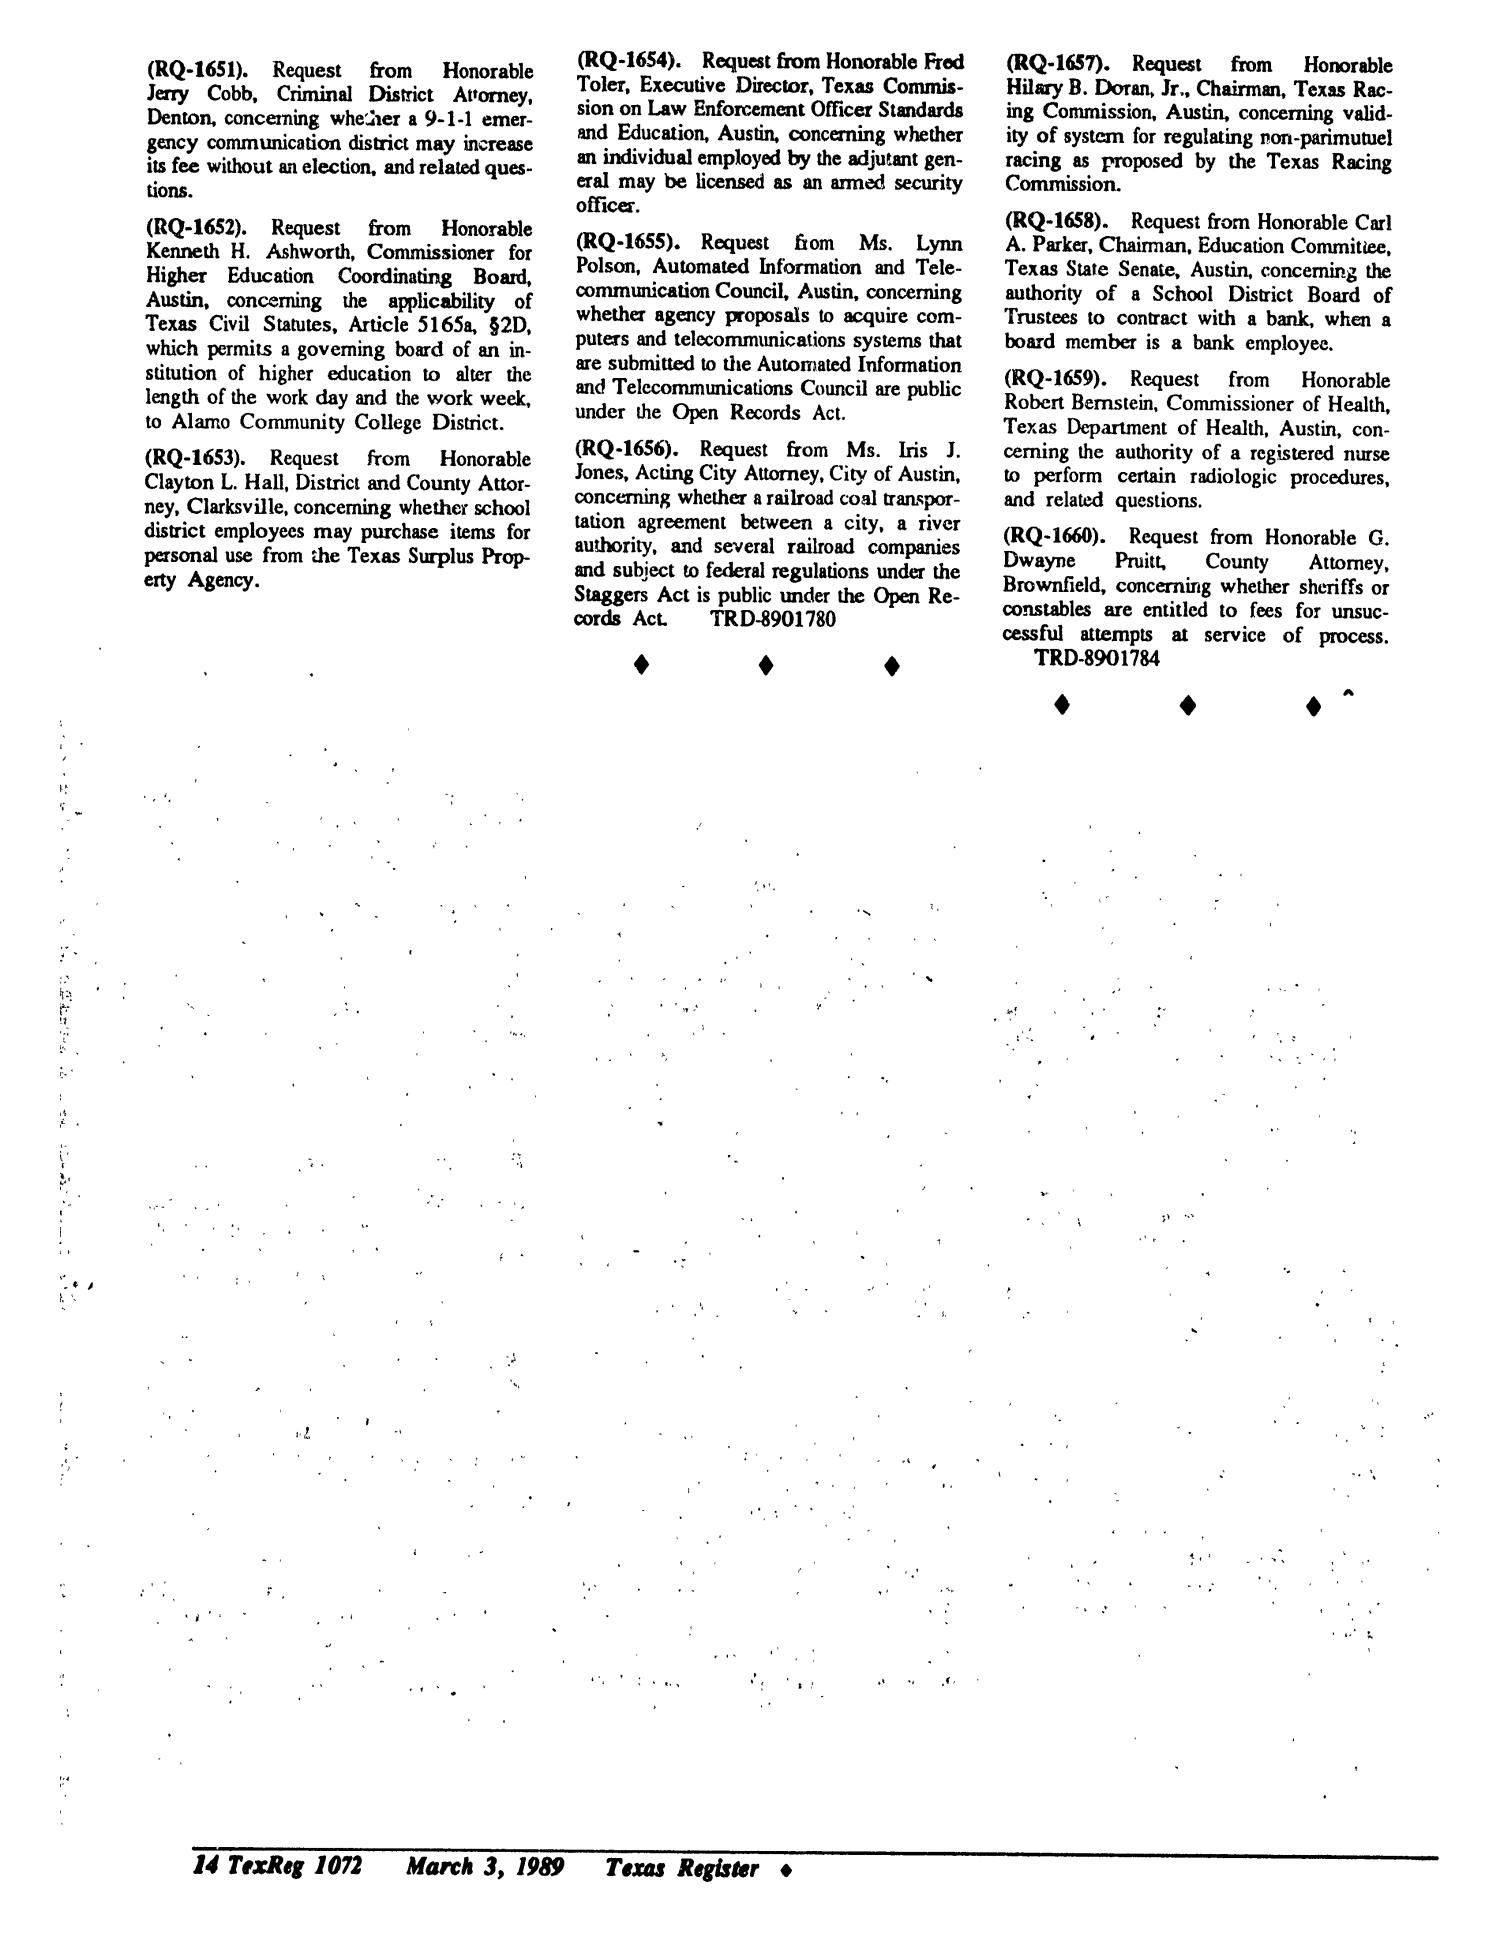 Texas Register, Volume 14, Number 17, Pages 1063-1136, March 3, 1989
                                                
                                                    1072
                                                